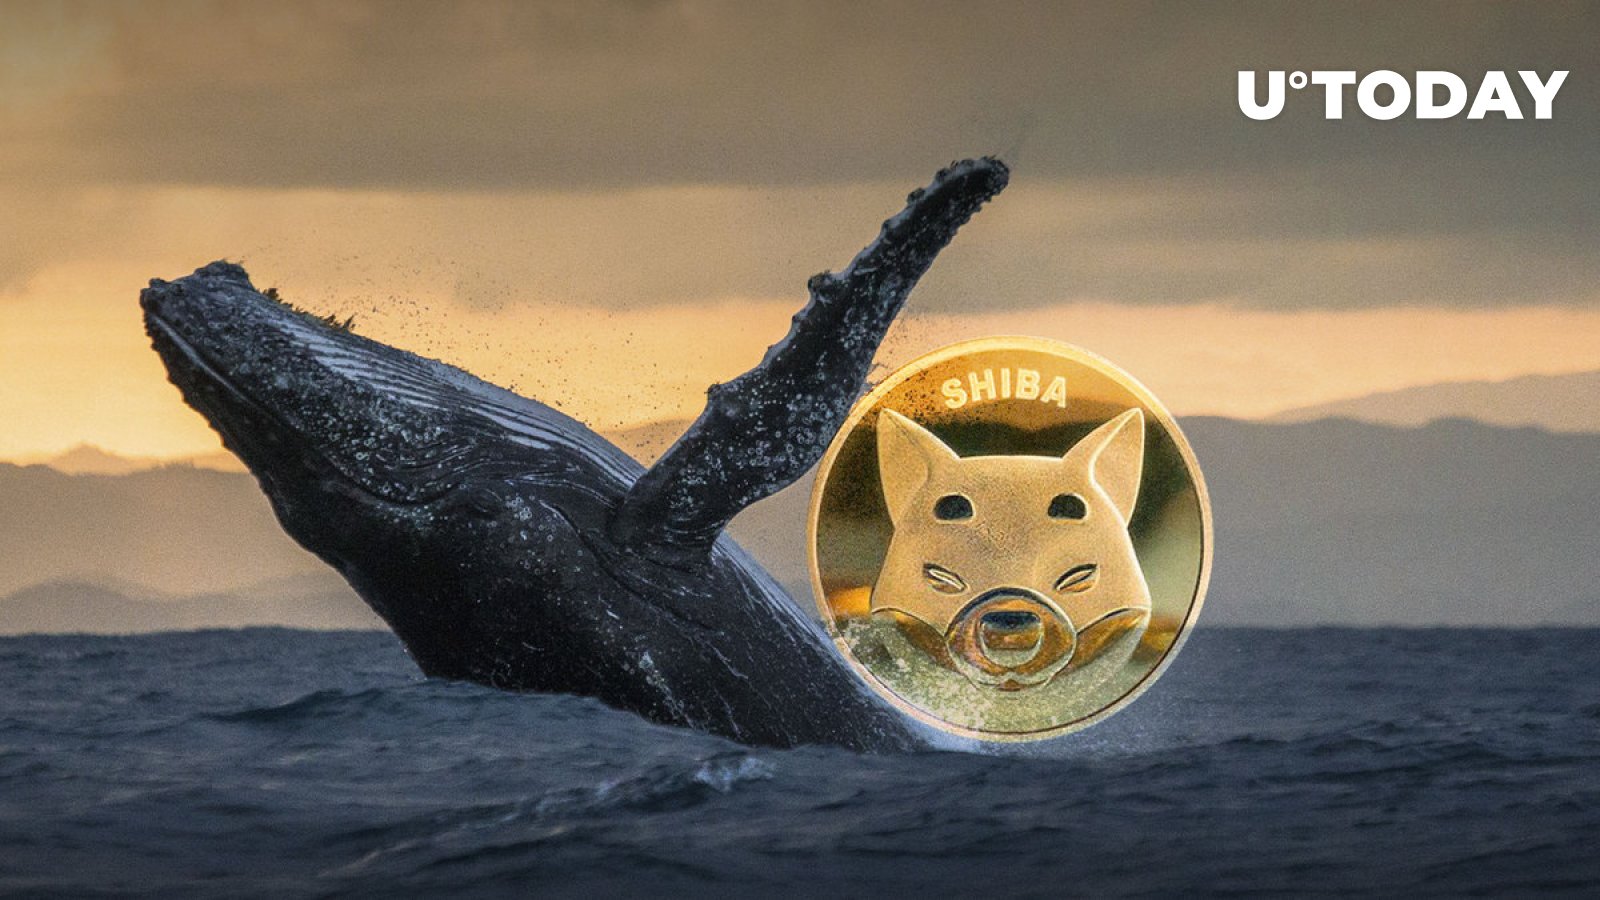 SHIB Becomes “Stablecoin” for Whales, Here’s What It Means